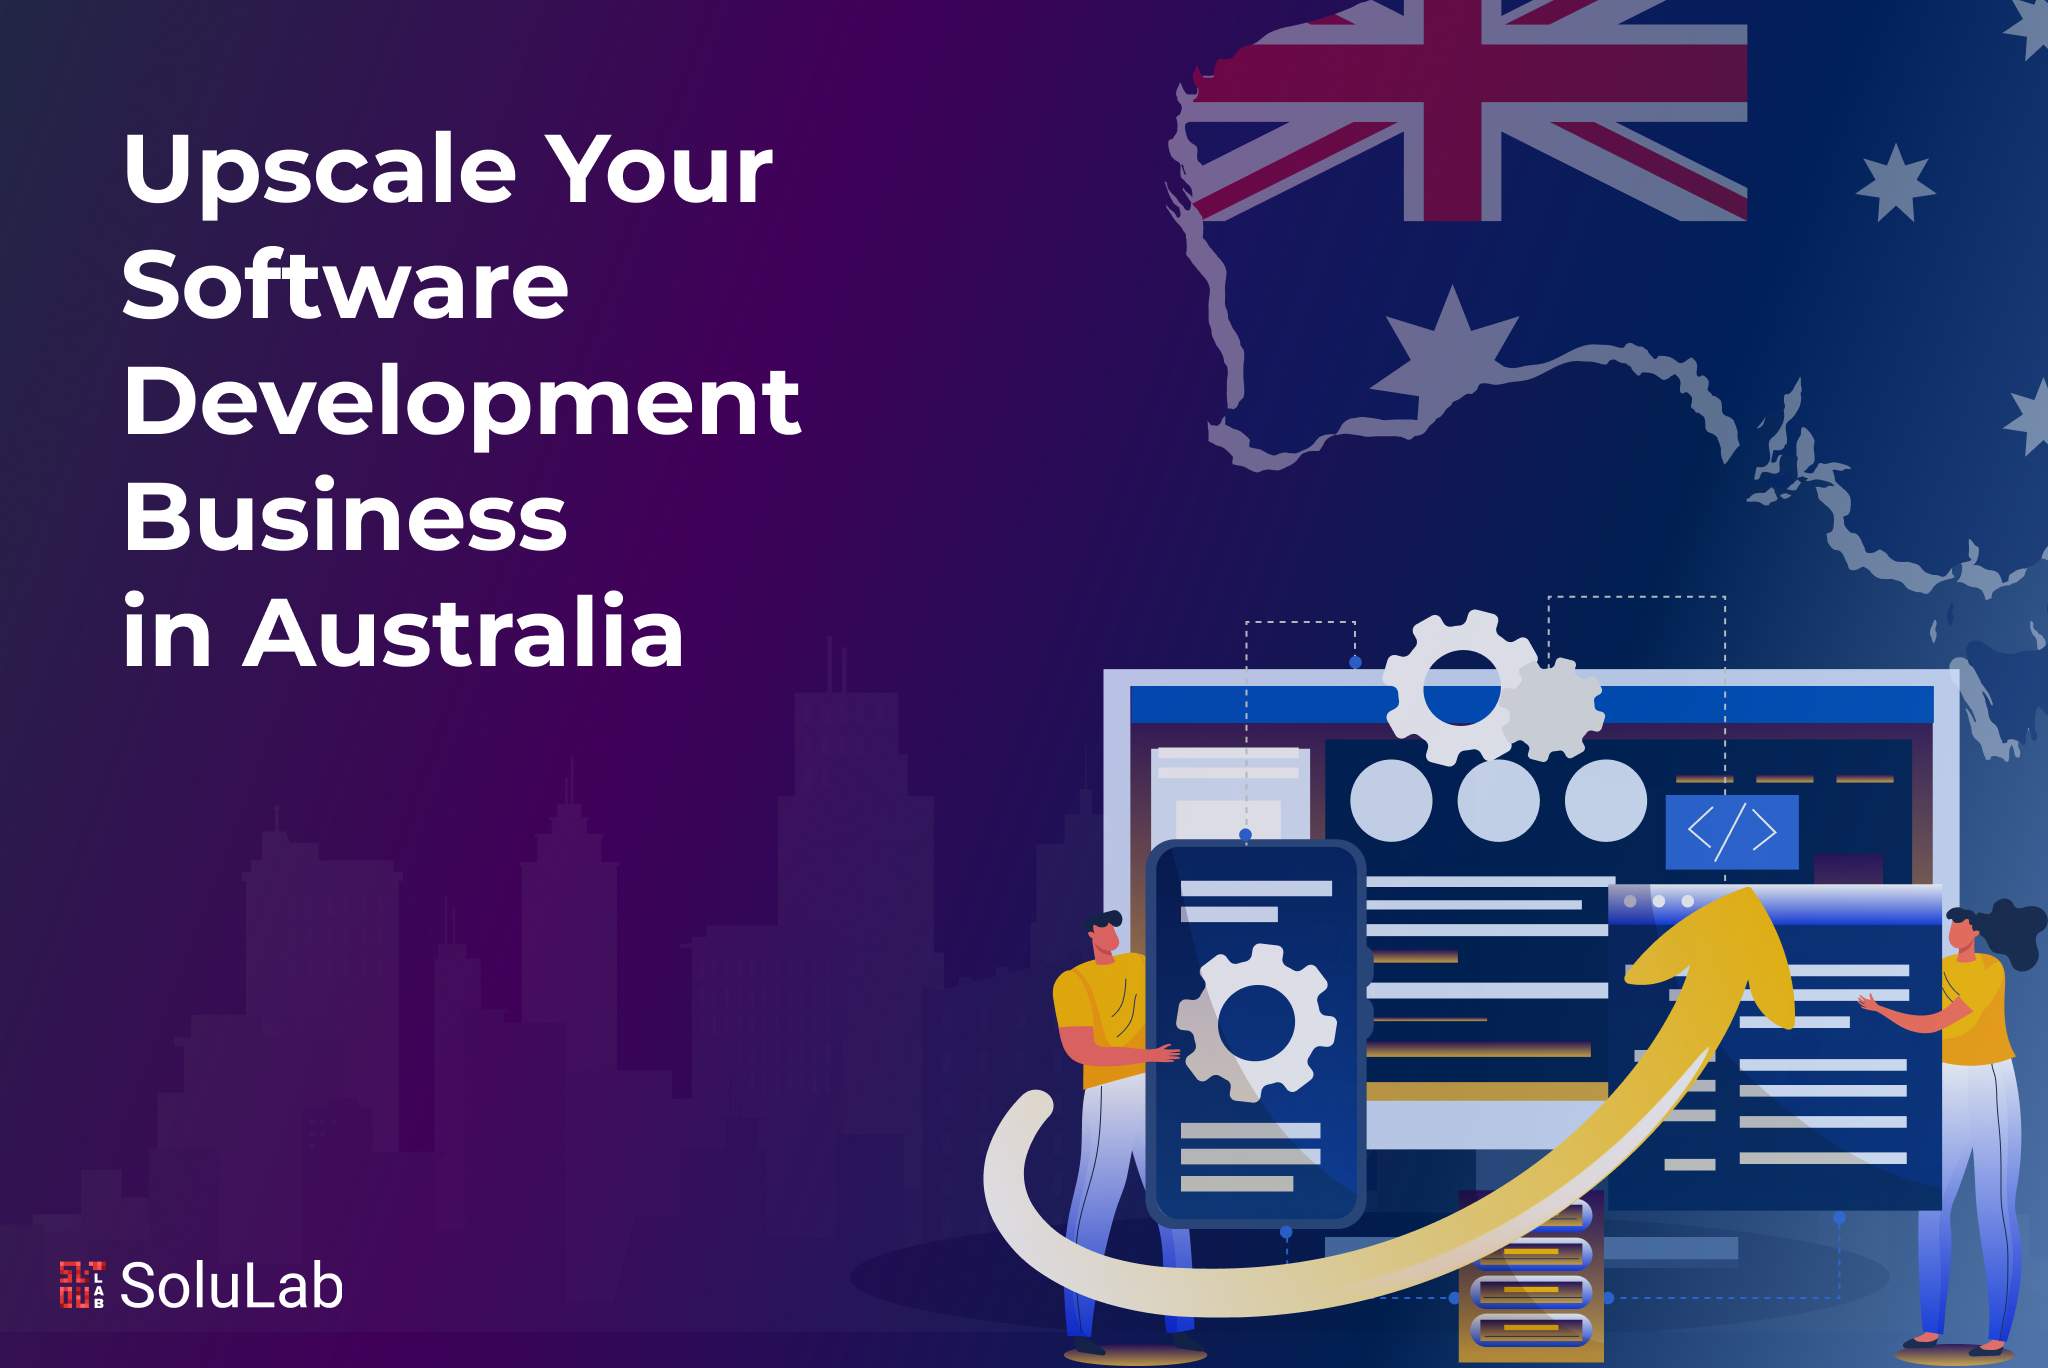 Upscale Your Software Development Business in Australia